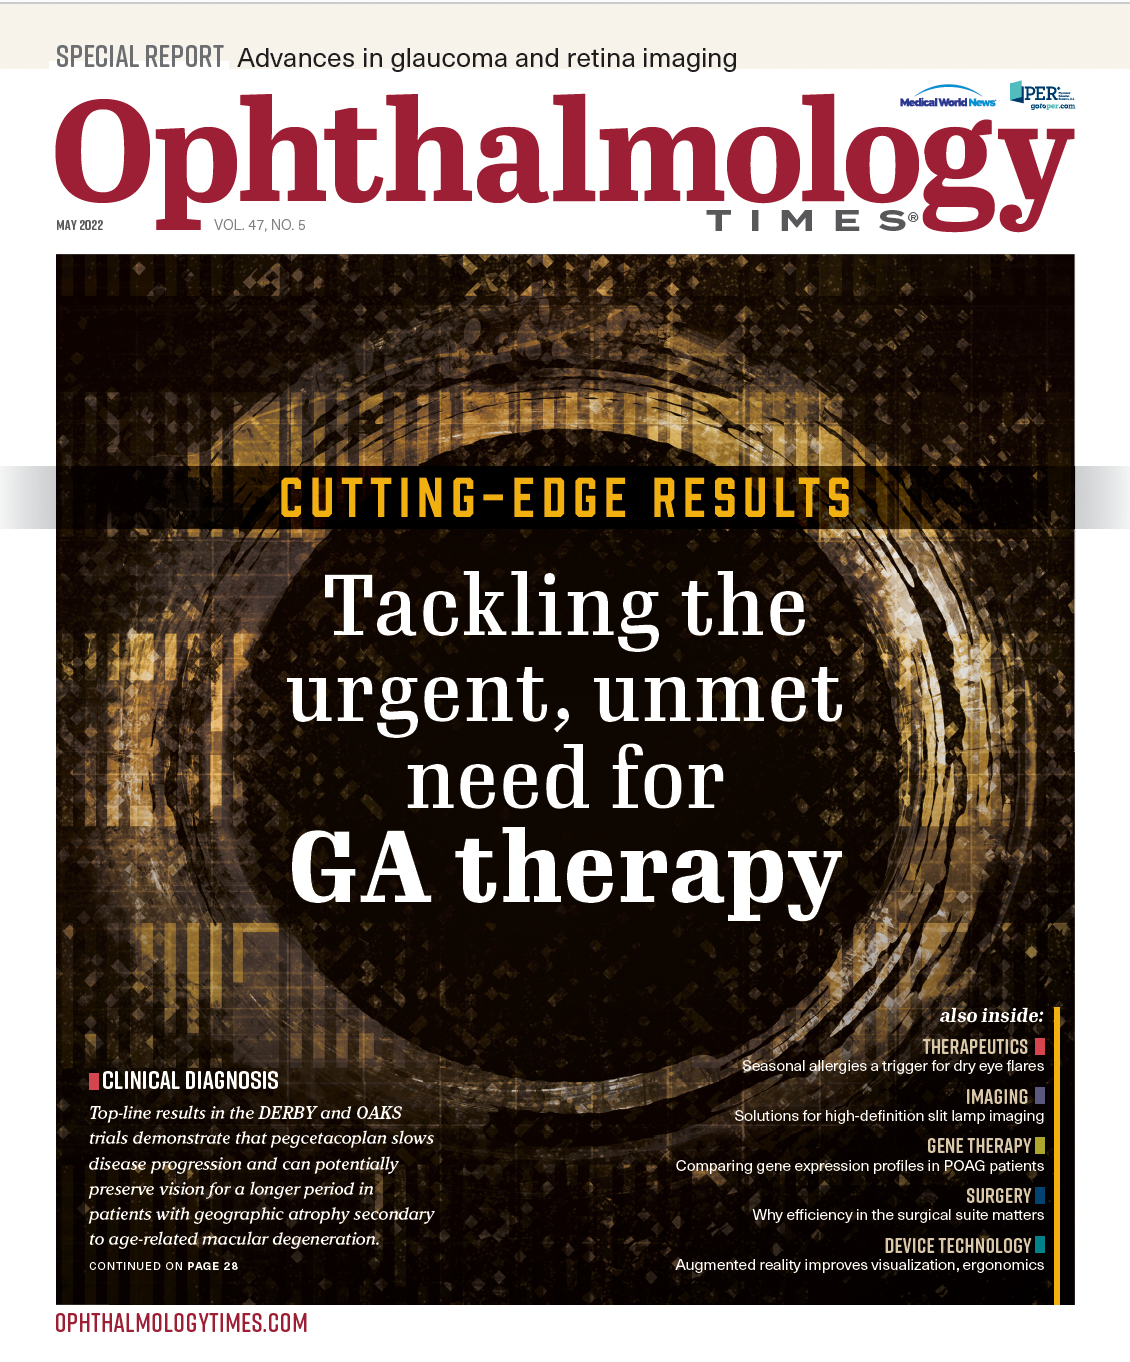 Ophthalmology Times: May 2022